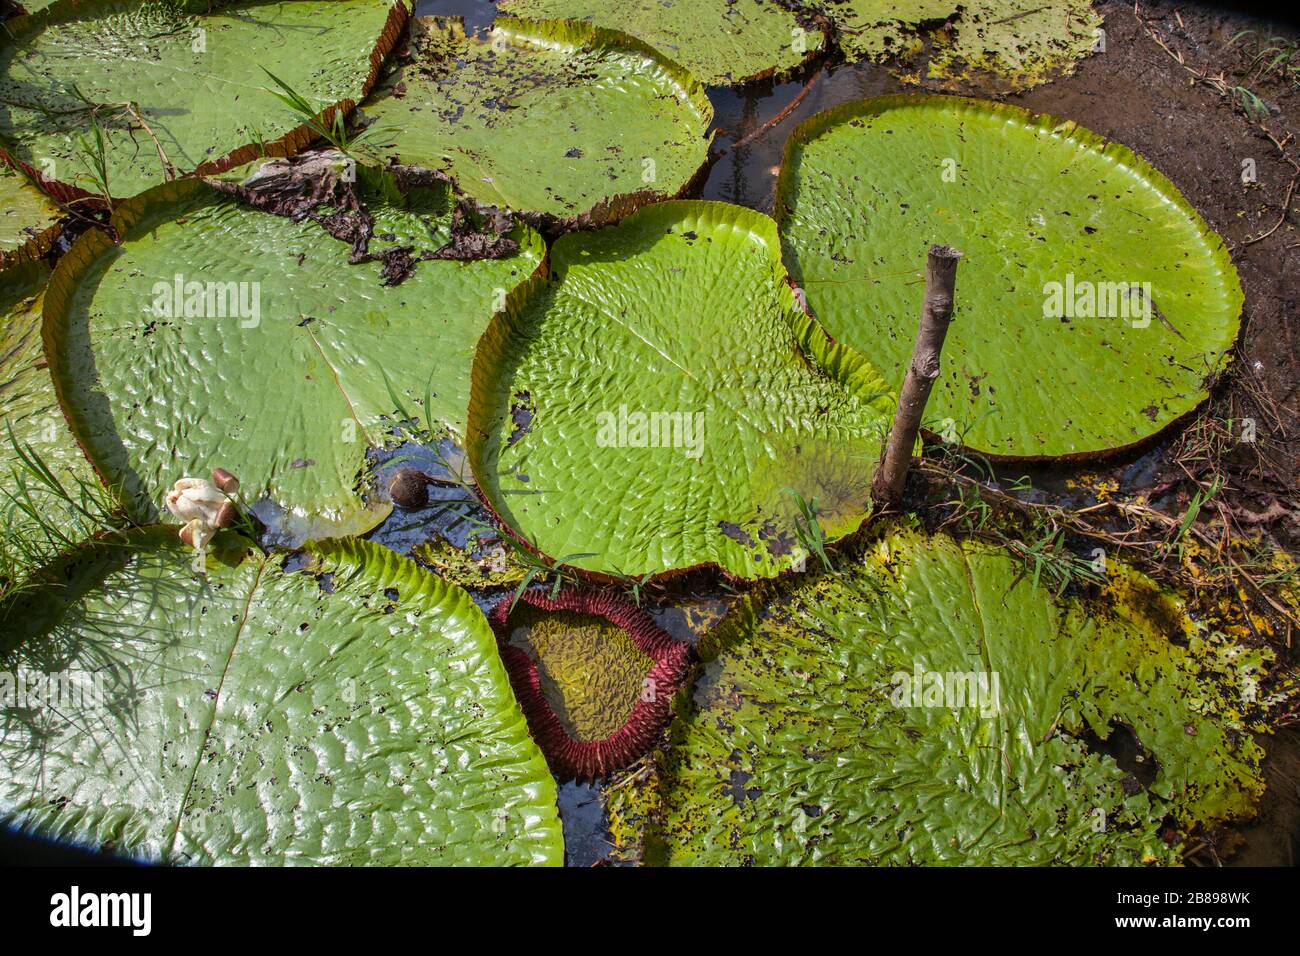 Amazonian Victoria giant water lily pads in the Amazon Rain Forest, Peru, South America. Stock Photo